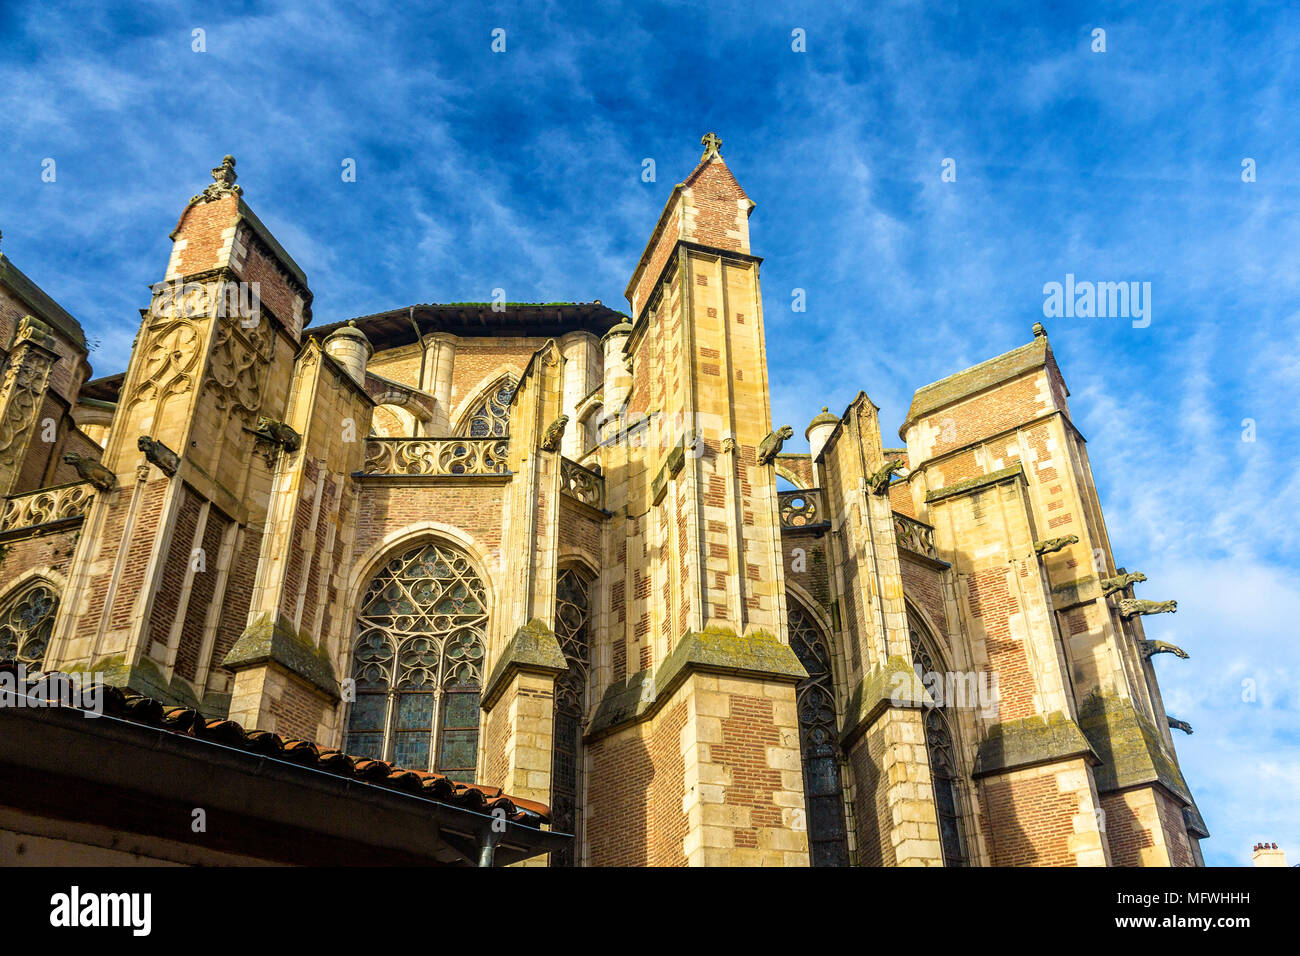 Details of the St. Etienne cathedral in Toulouse - France Stock Photo